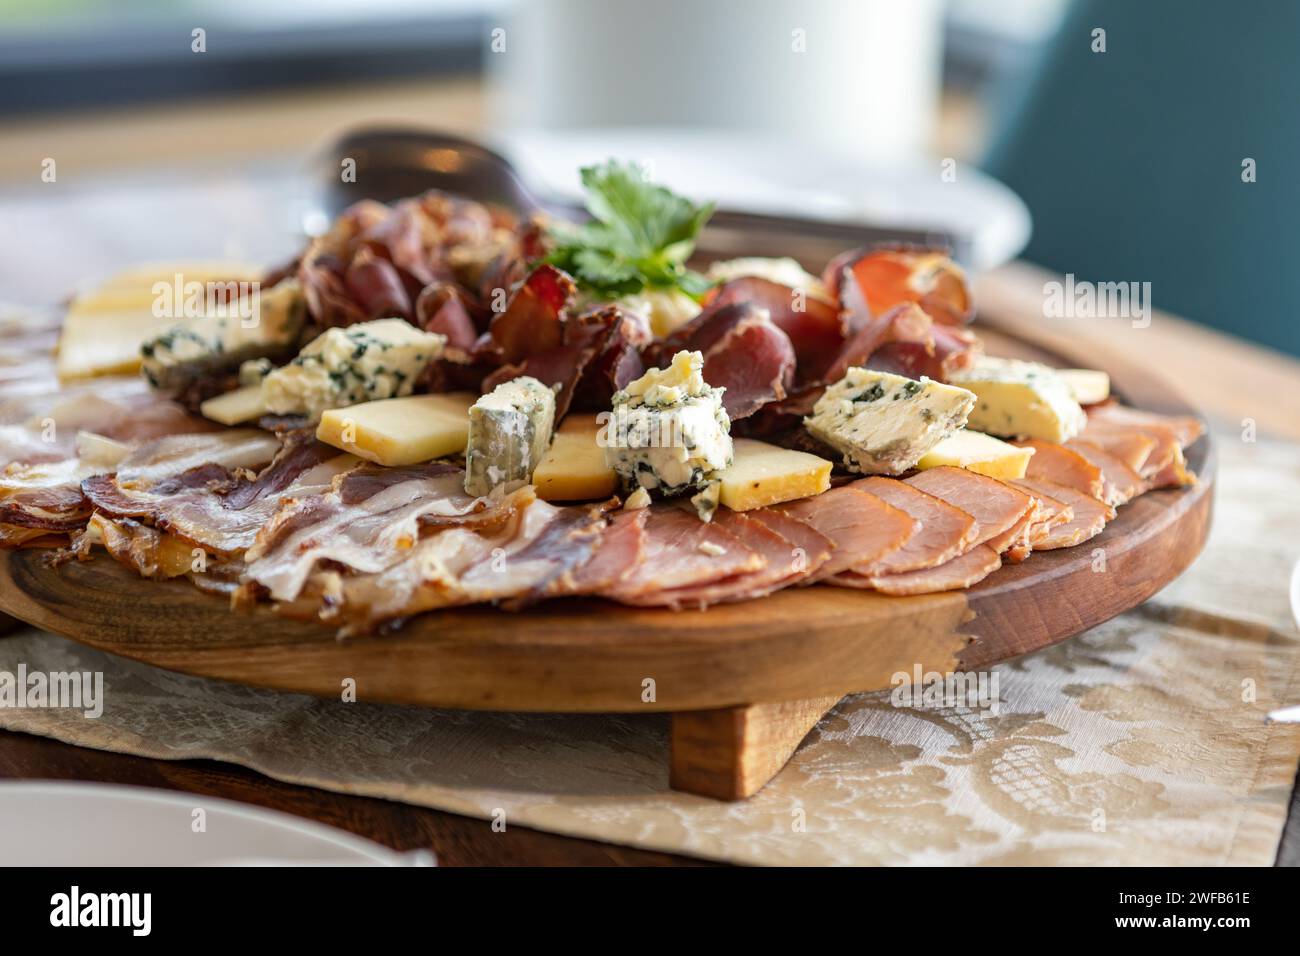 A wooden cutting board bearing a delectable arrangement of assorted meats and cheeses. Stock Photo